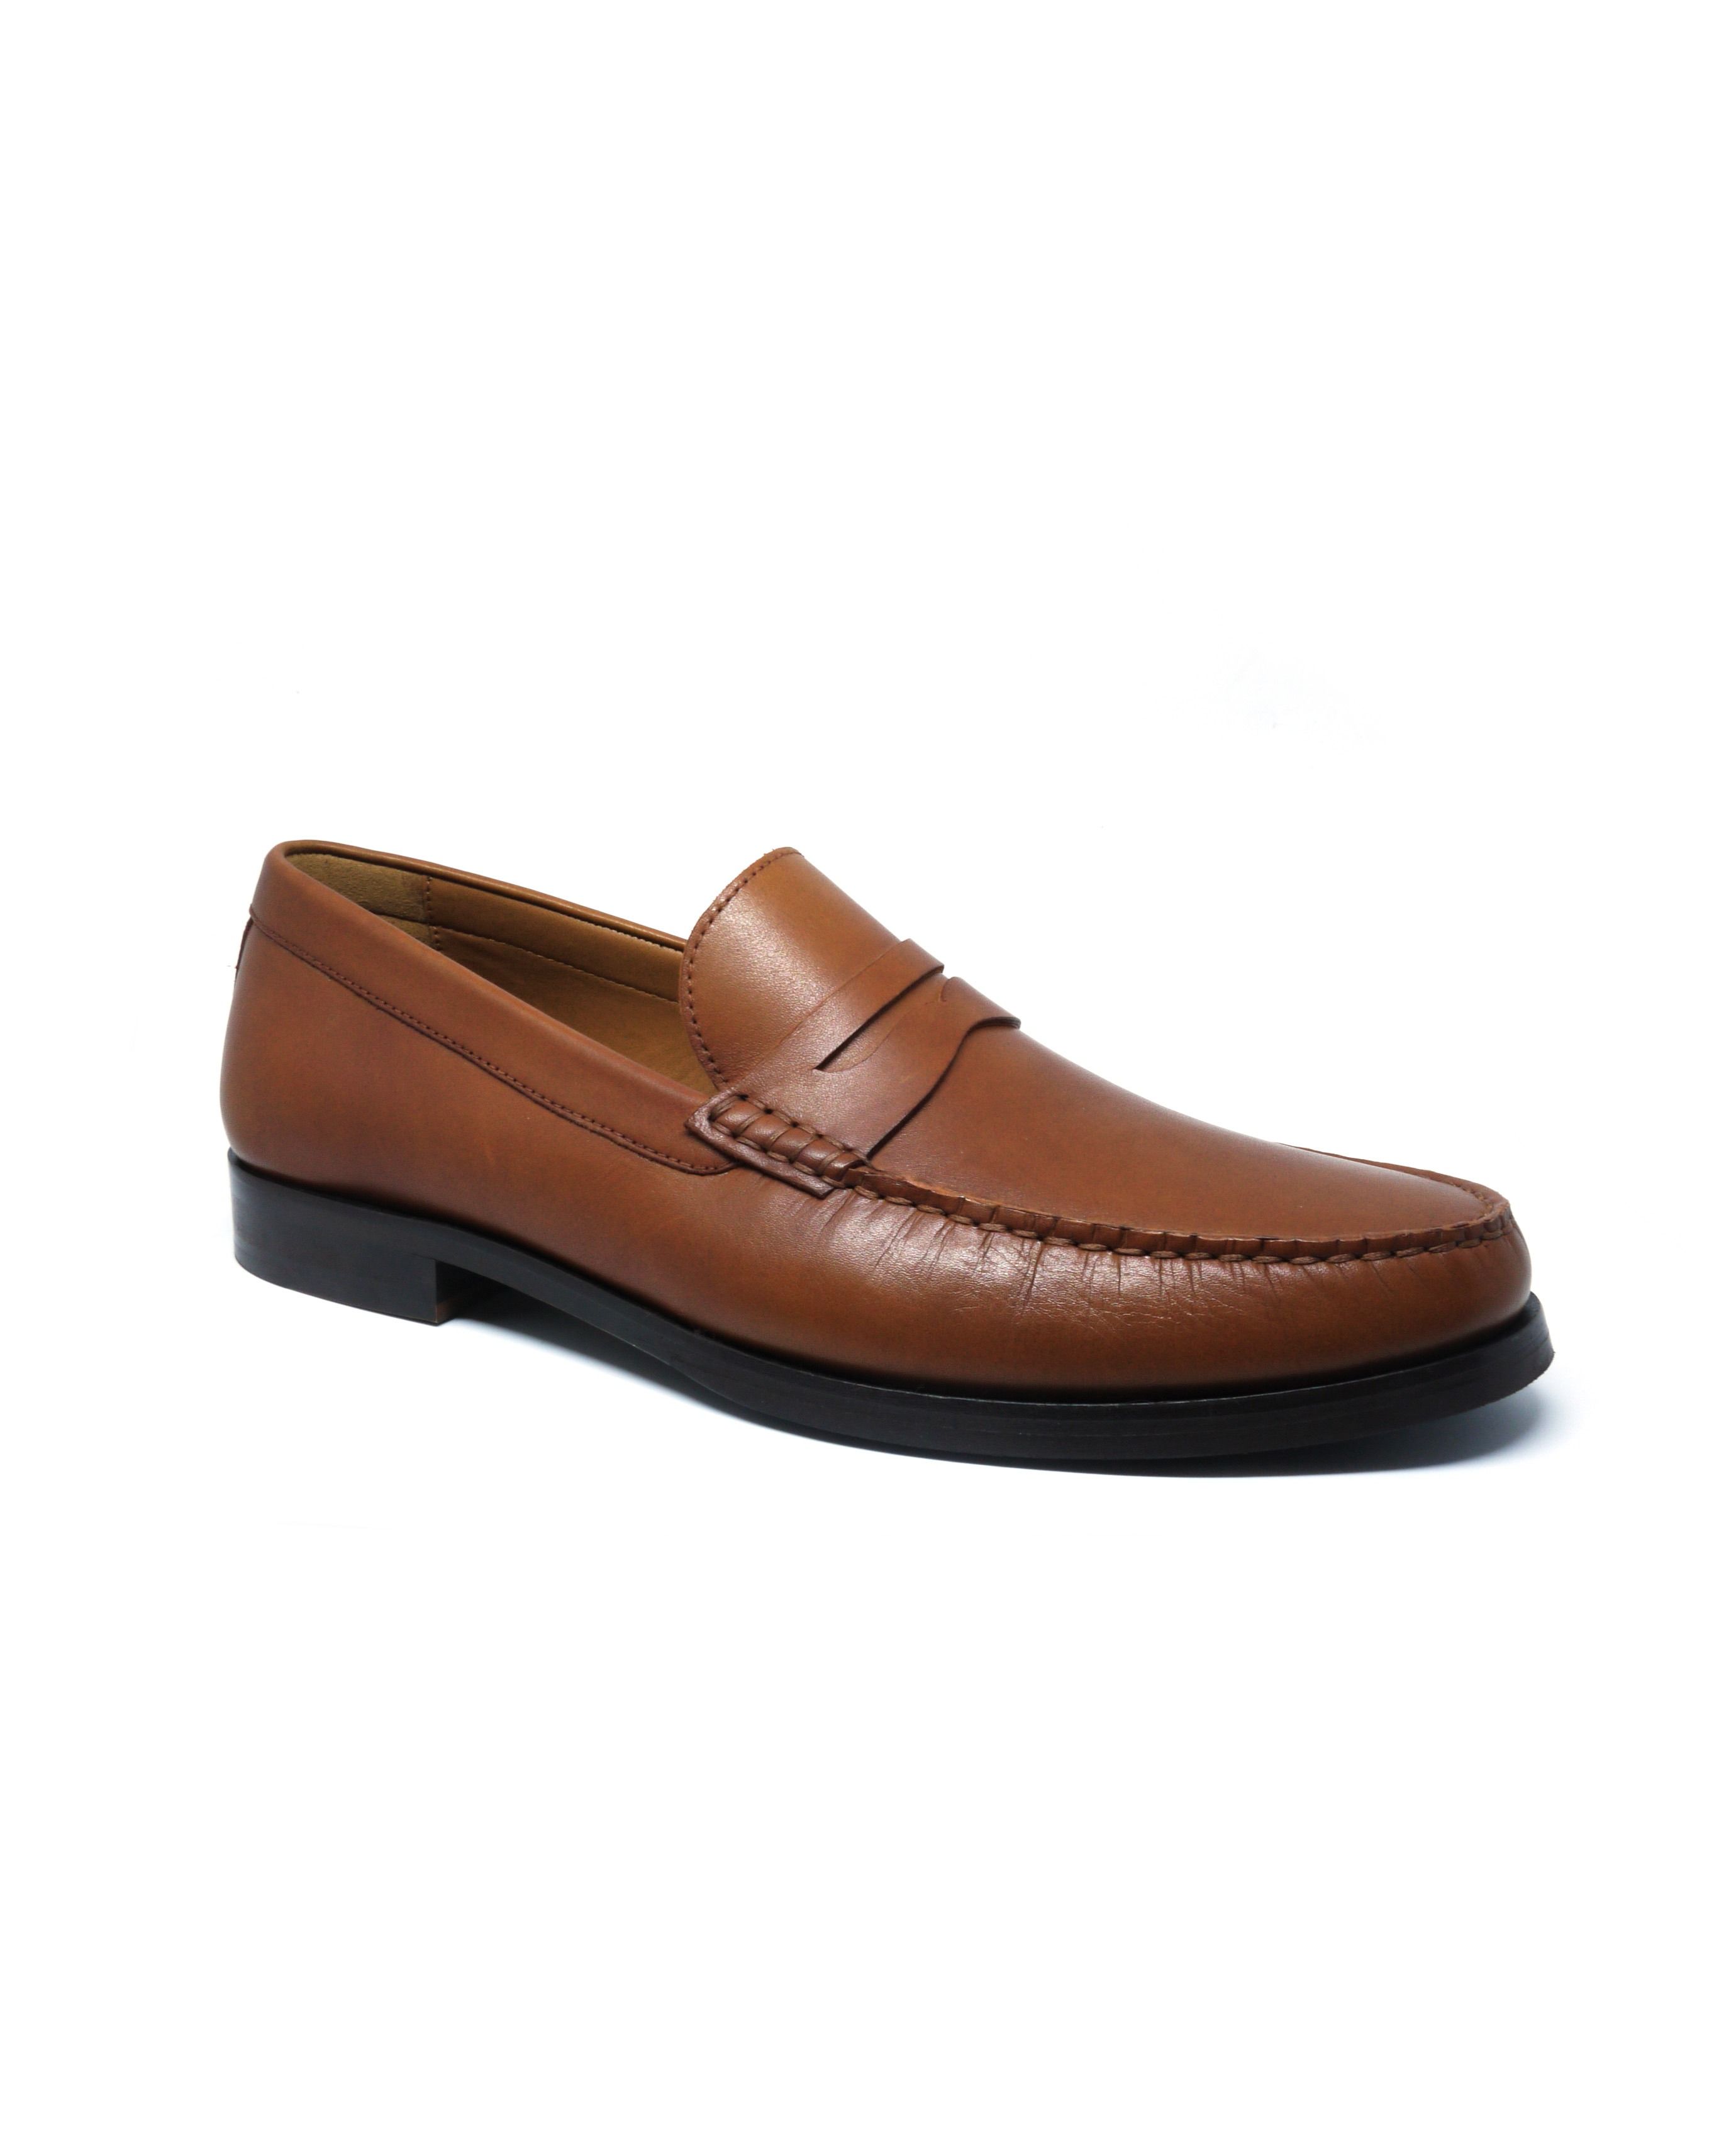 Men's Tan Leather Loafers | Savile Row Co